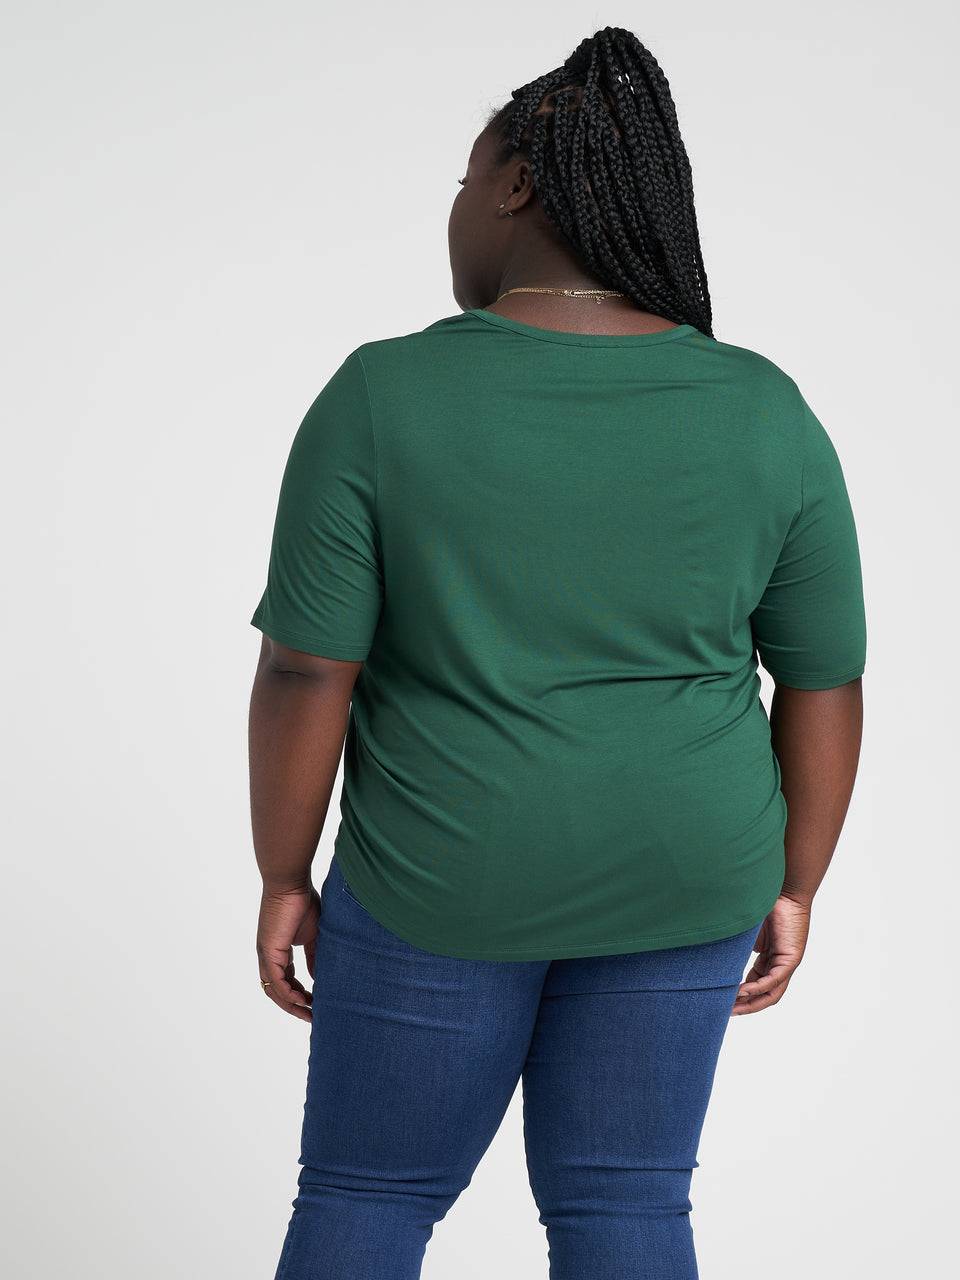 Lily Liquid Jersey V-Neck Stovepipe Tee - Kelly Green Zoom image 4